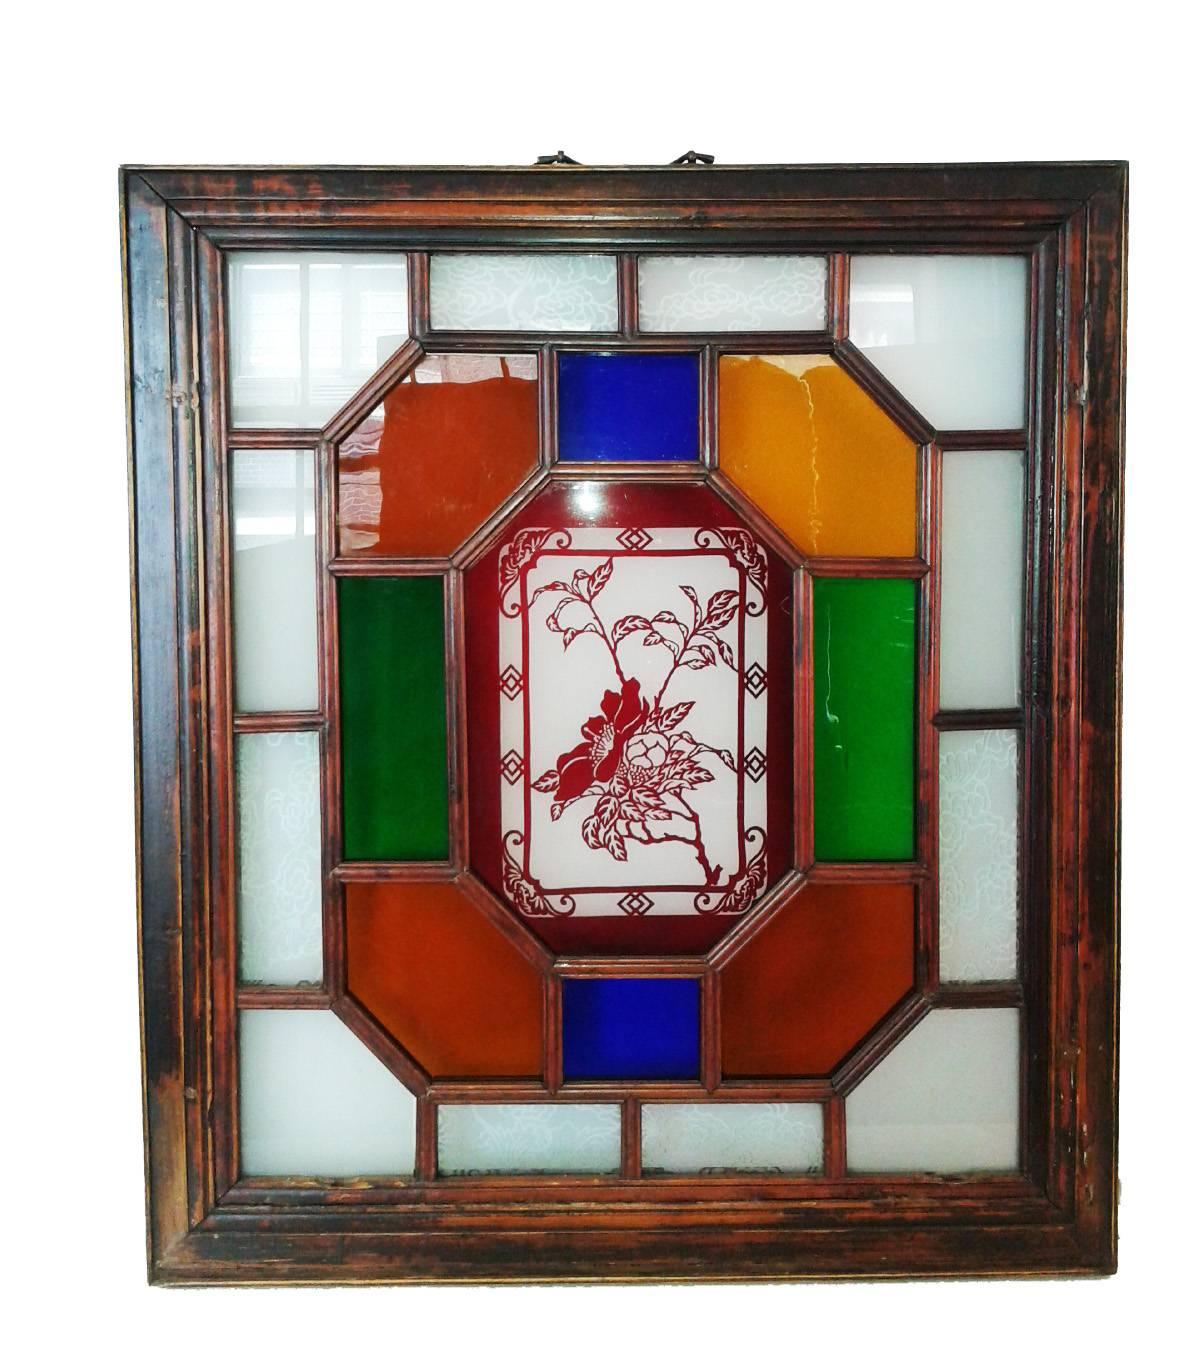 A Manchurian stained-glass panel on a wood frame, Late 19th century. Floral motif in the center, plus etching on clear panels. Excellent antique condition. Slight wear commensurate with age and use. Special price.